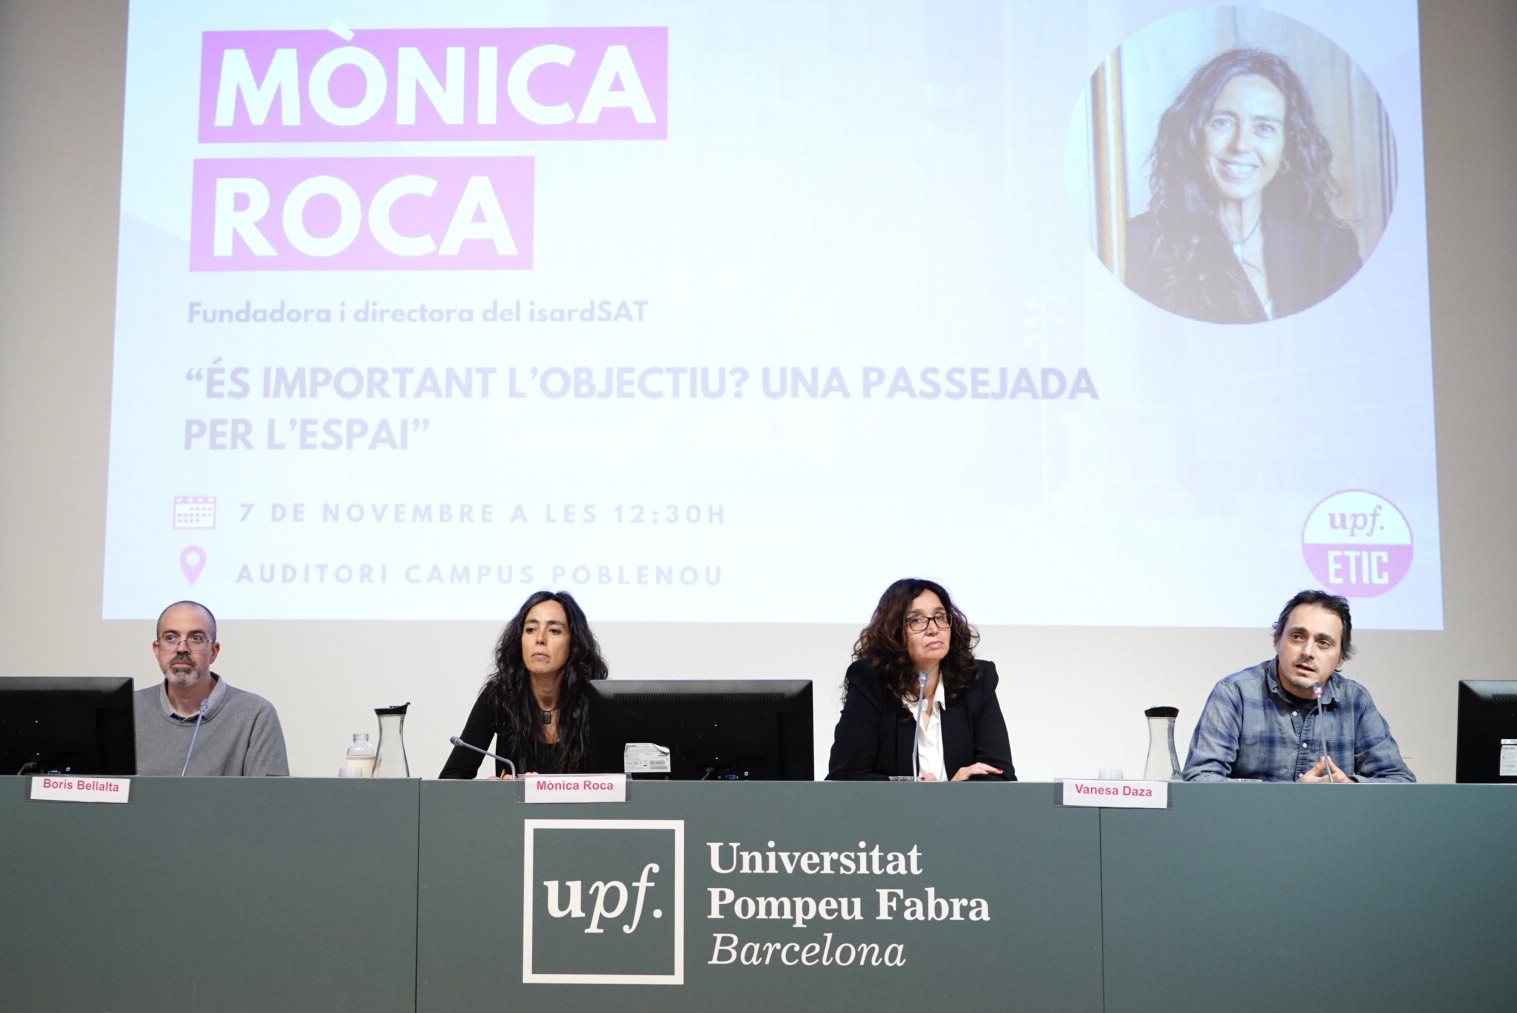 The inaugural lecture of the School of Engineering focuses on the evolution of the role of women in technological fields